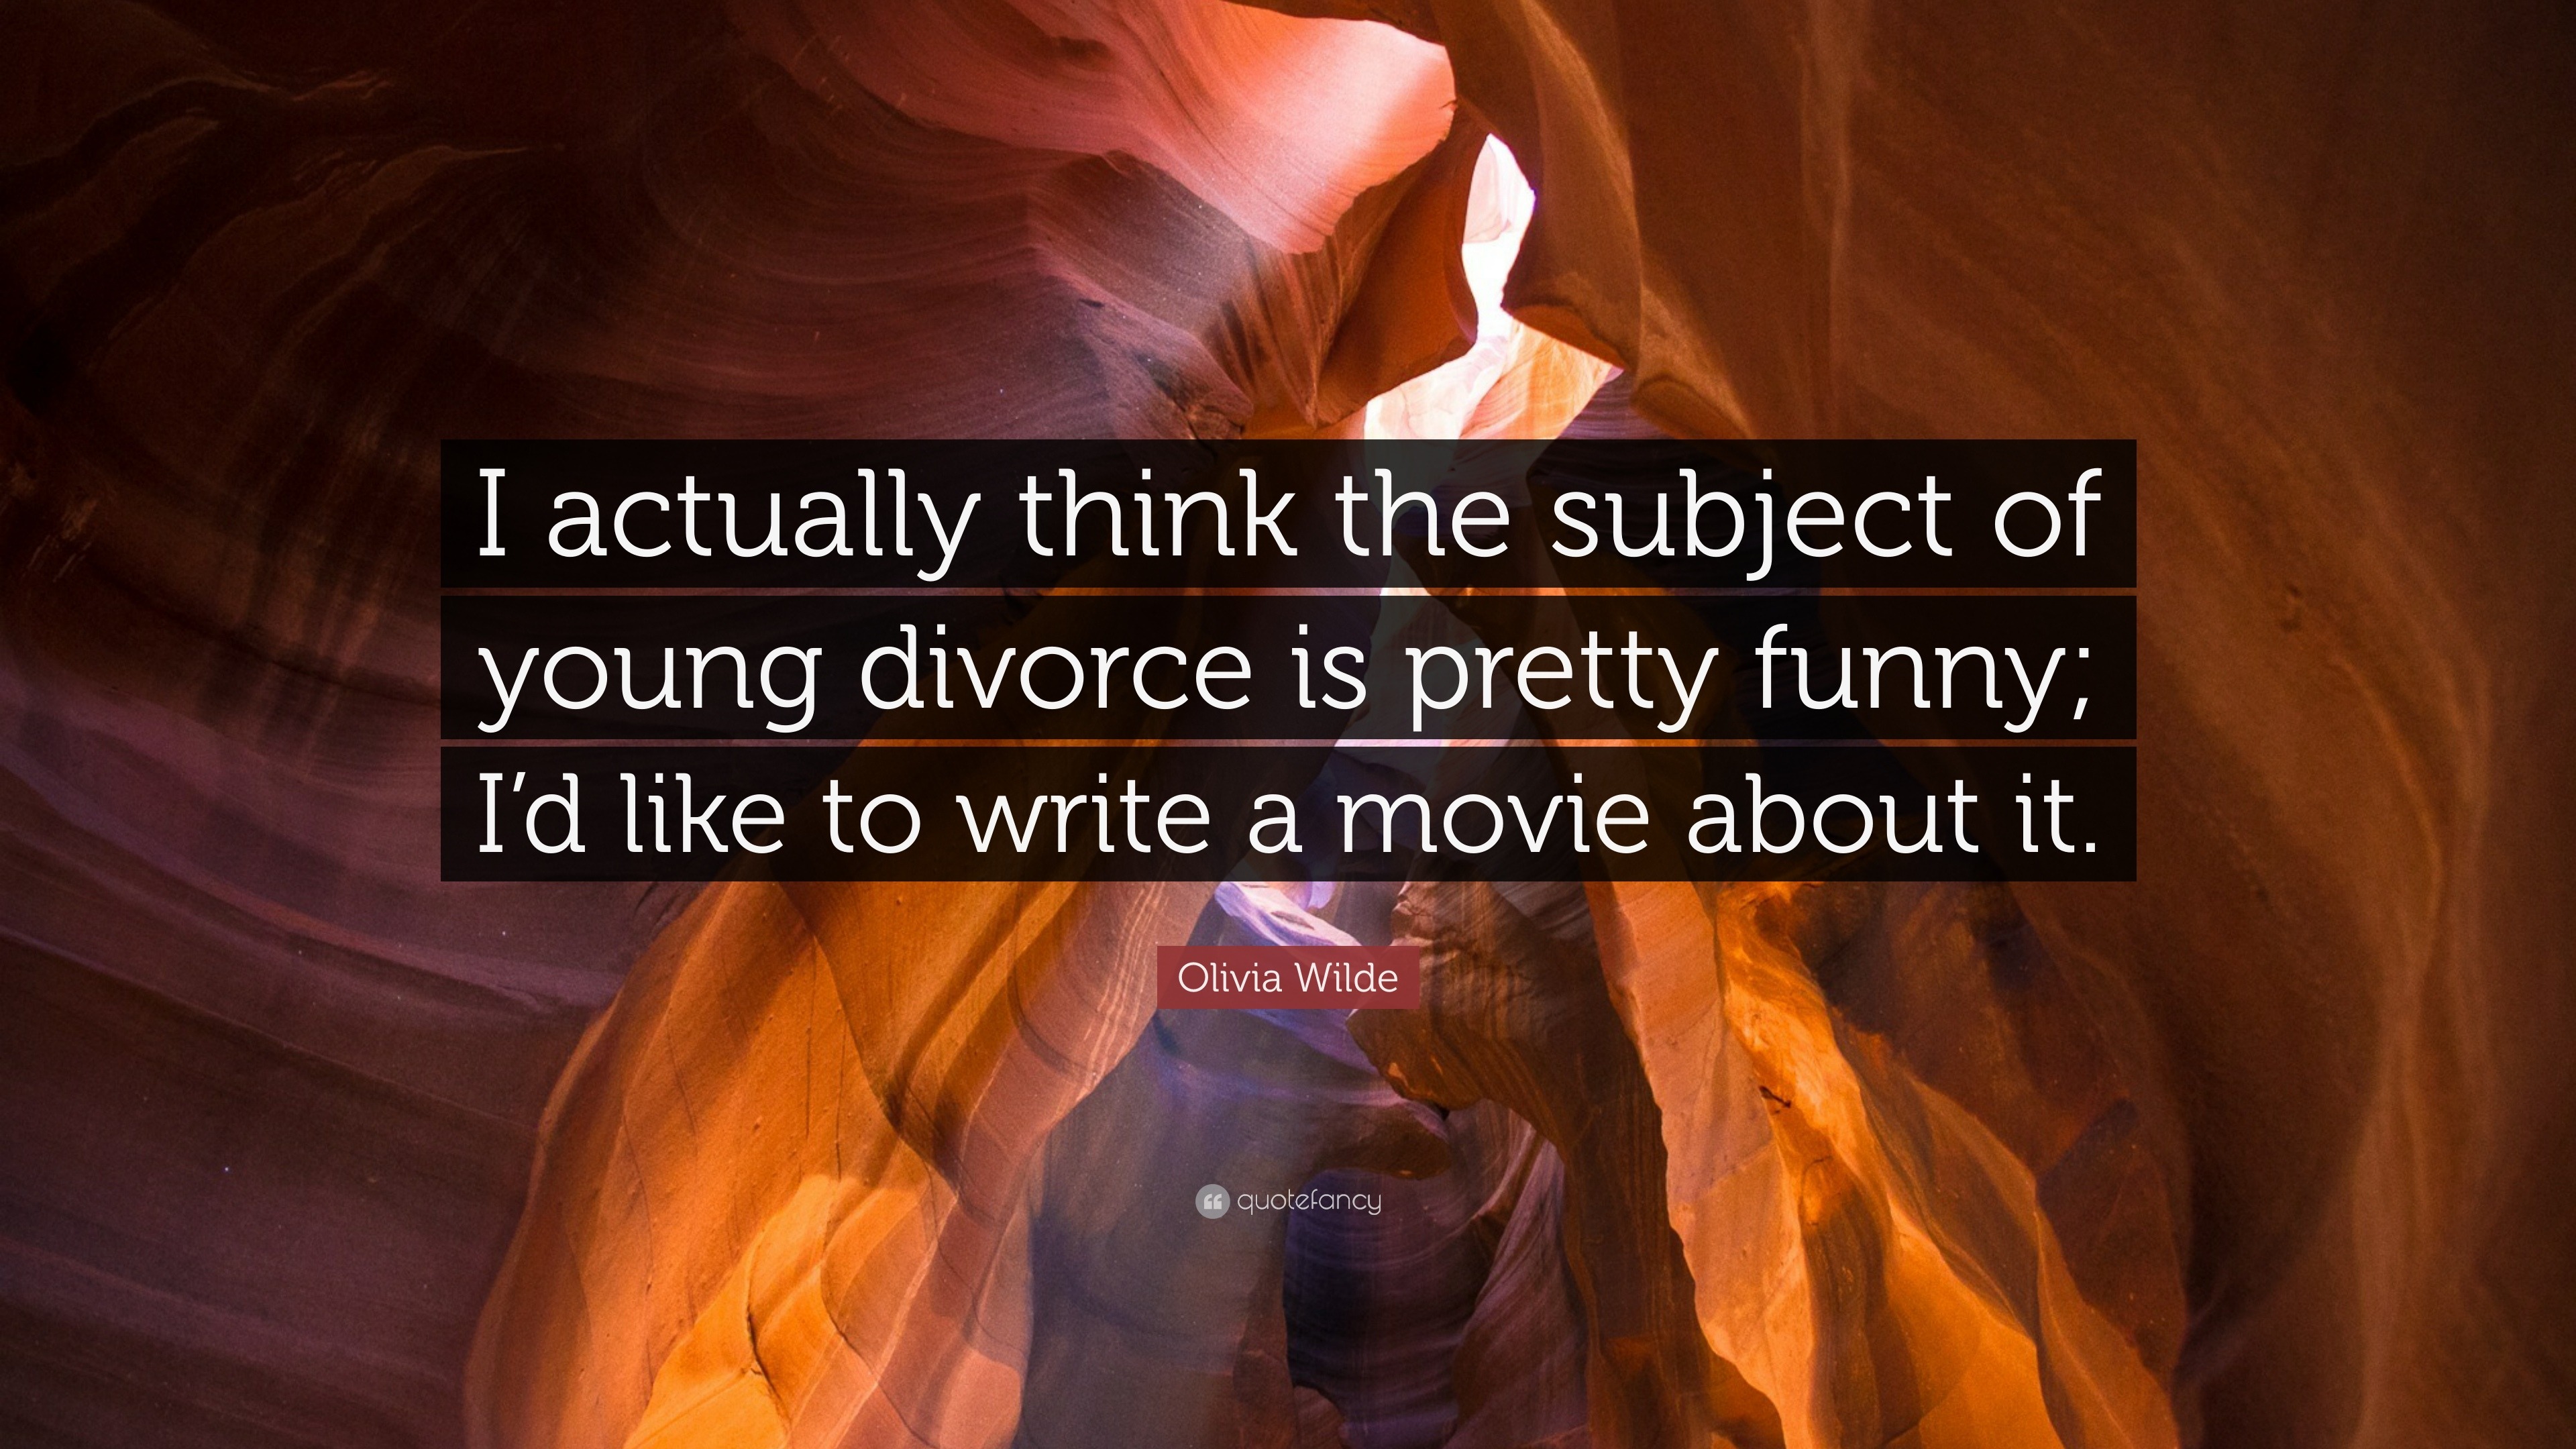 Olivia Wilde Quote: “I actually think the subject of young divorce is pretty  funny; I'd